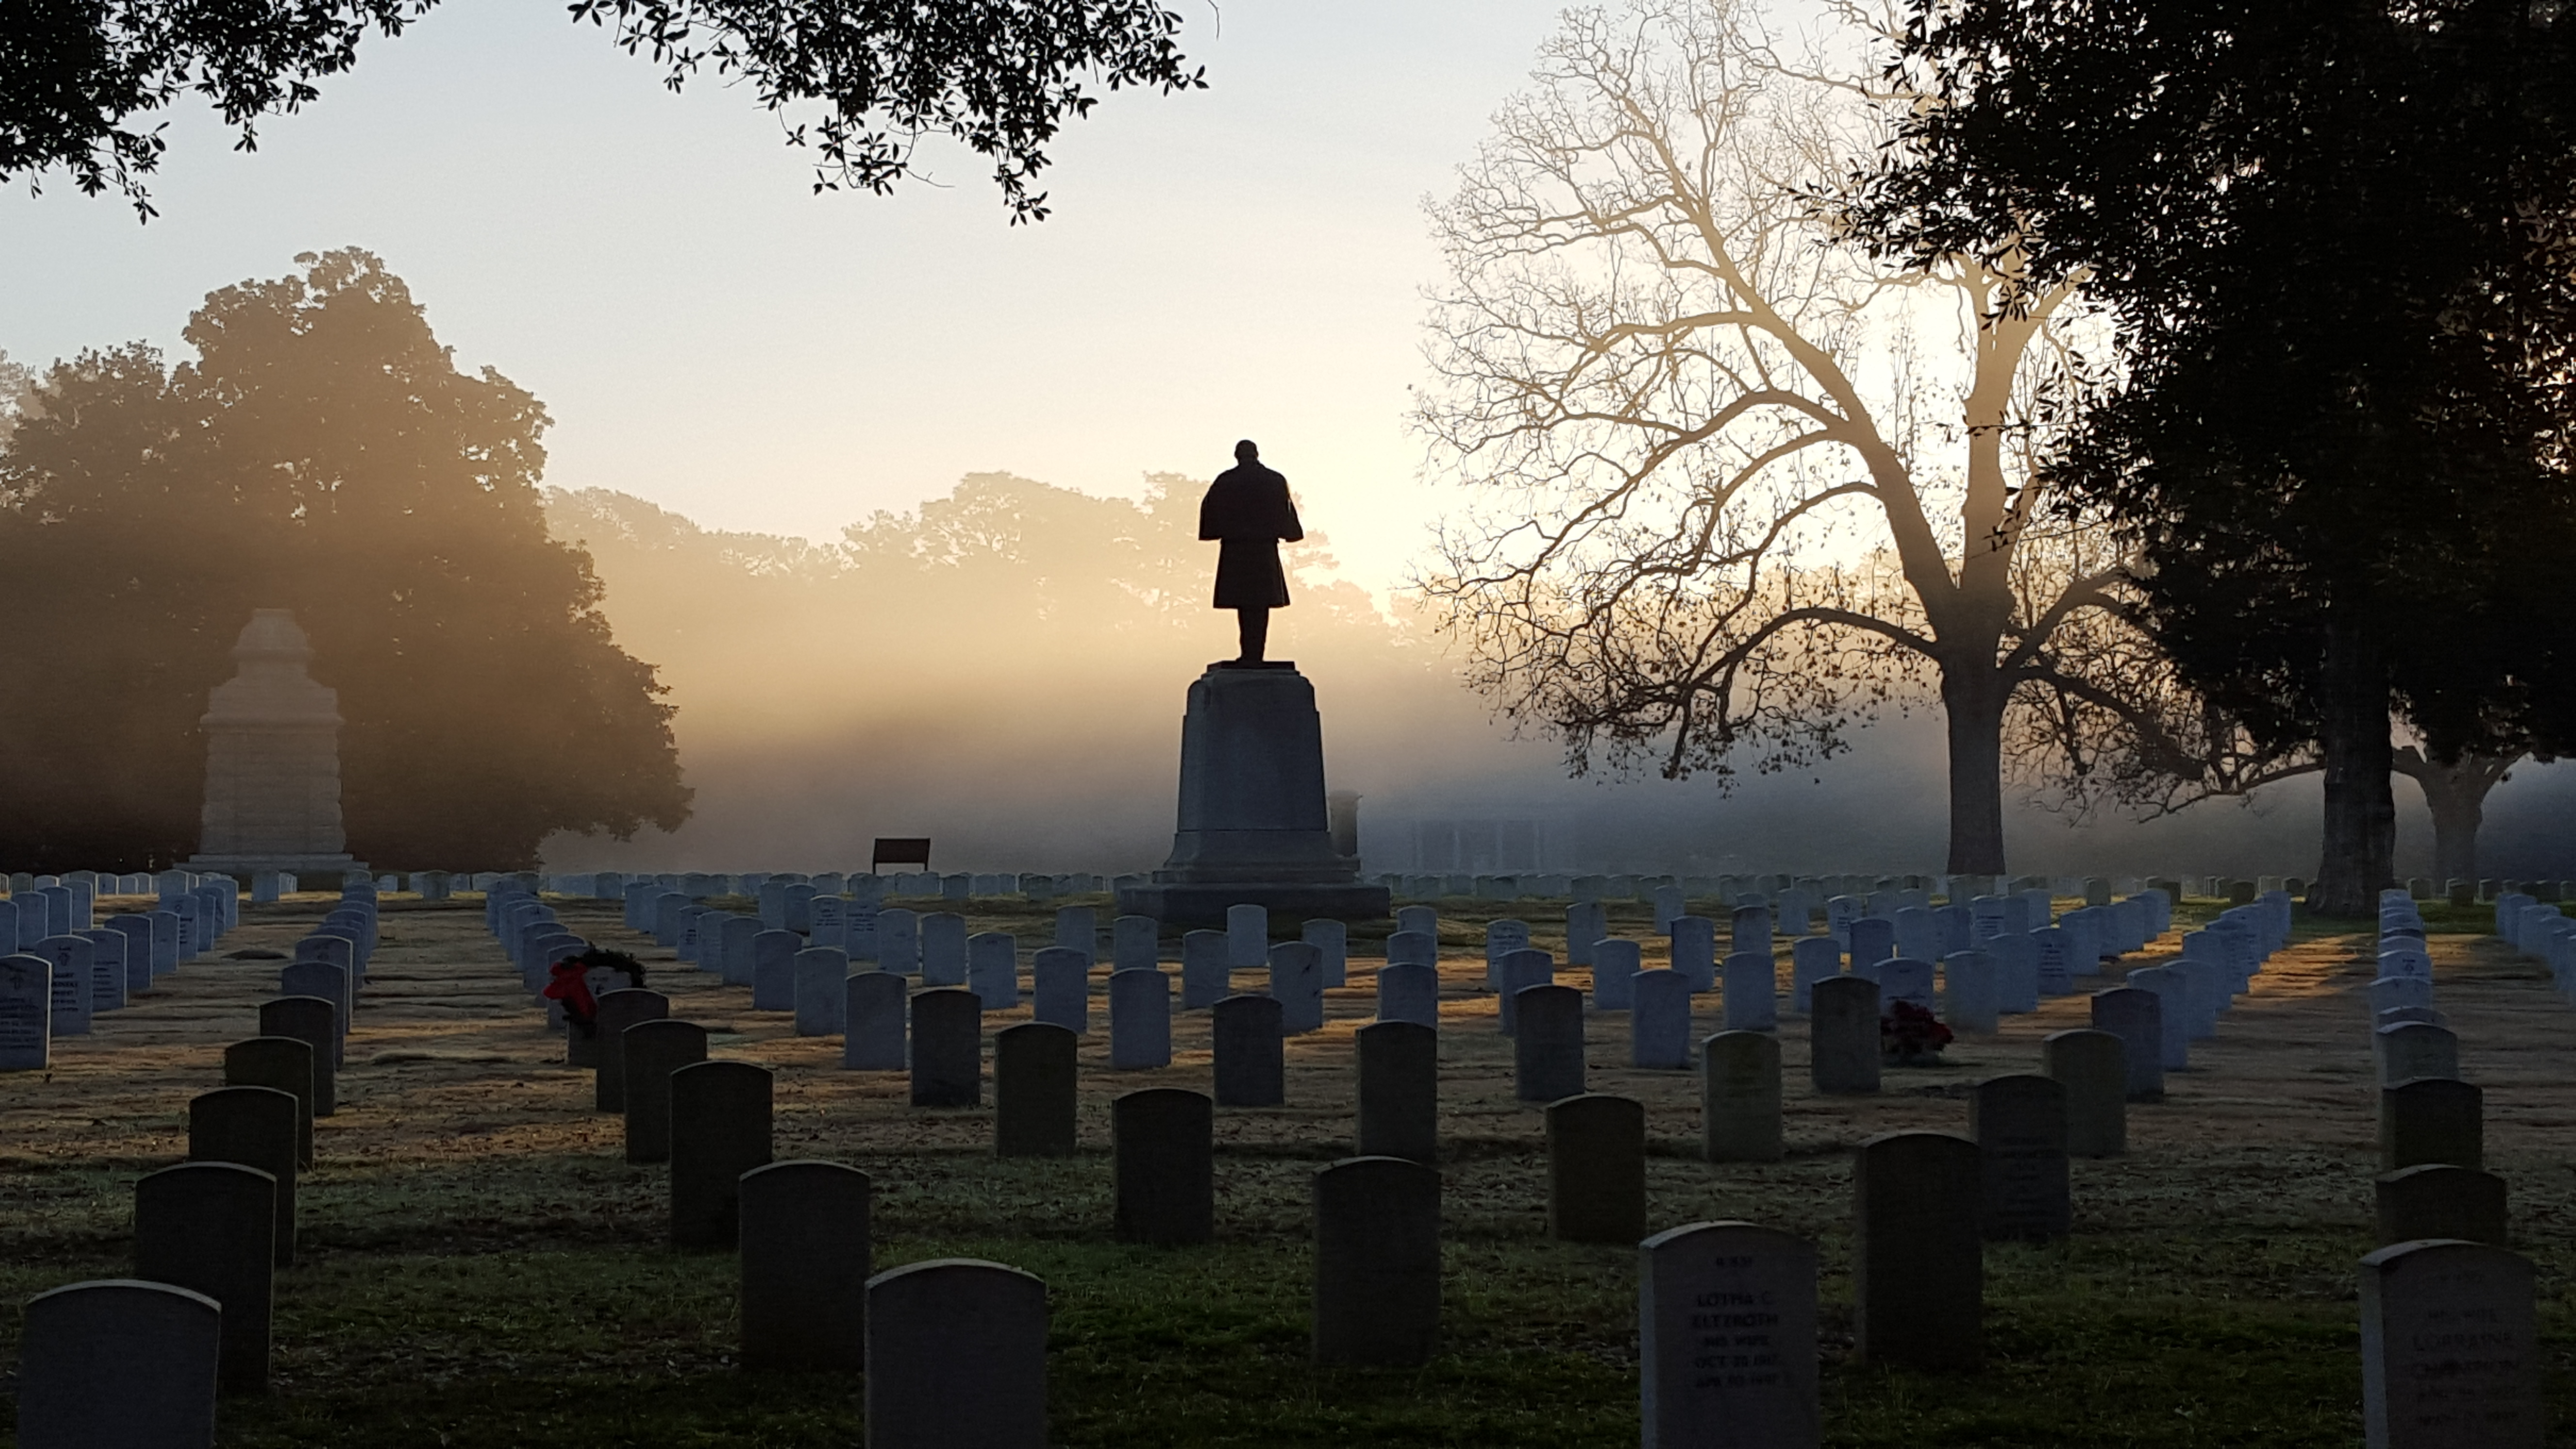 Fog rests on a stone monument of a Civil War soldier standing among hundreds of graves.